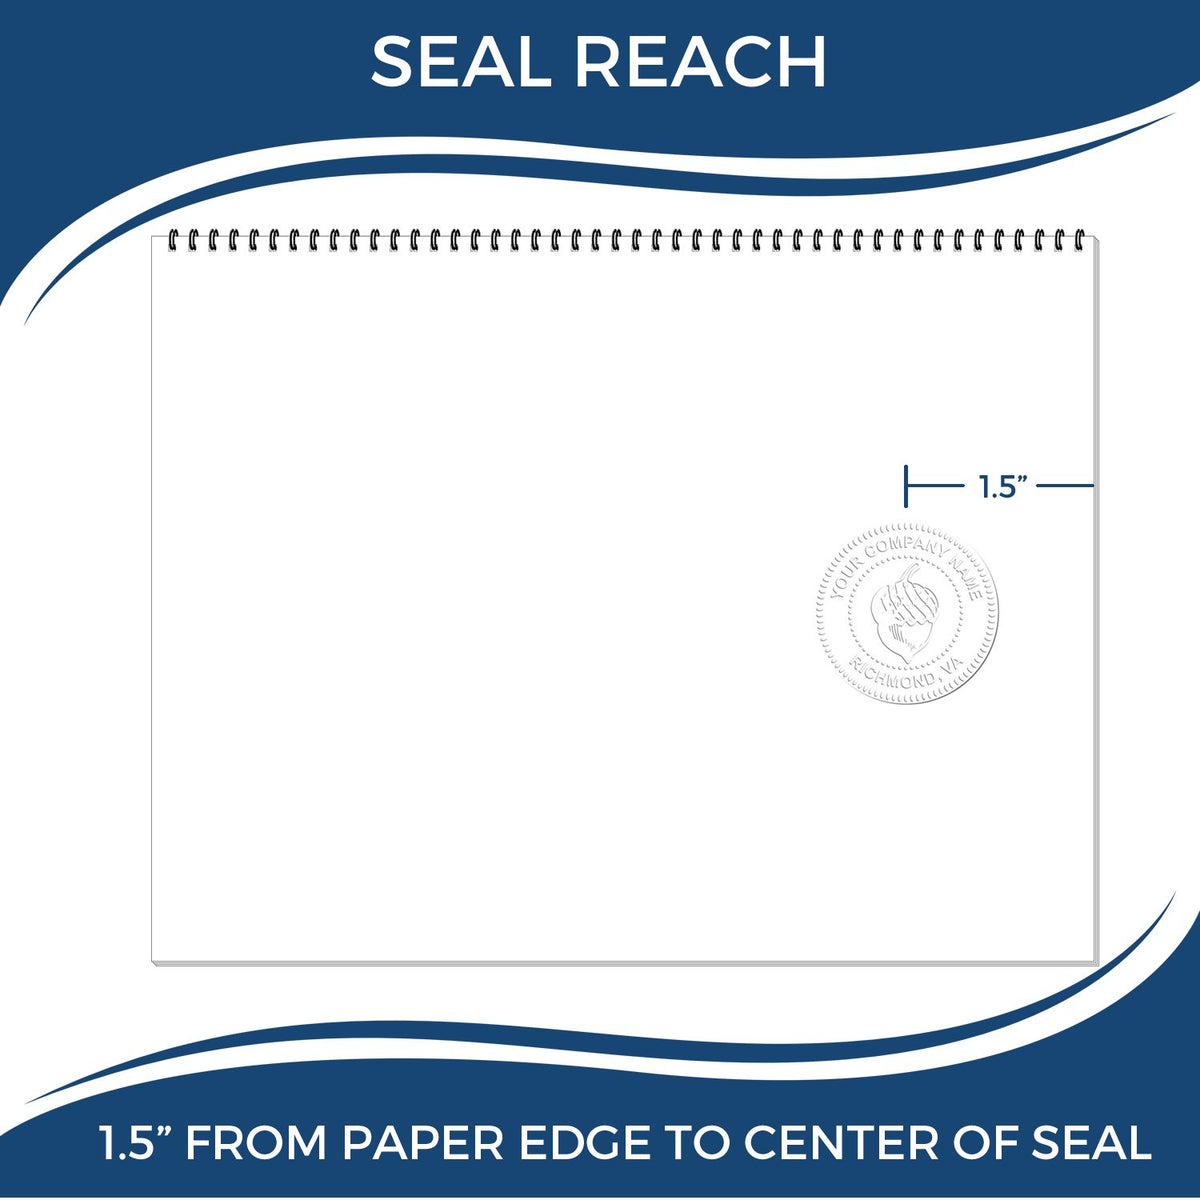 An infographic showing the seal reach which is represented by a ruler and a miniature seal image of the Hybrid Texas Landscape Architect Seal